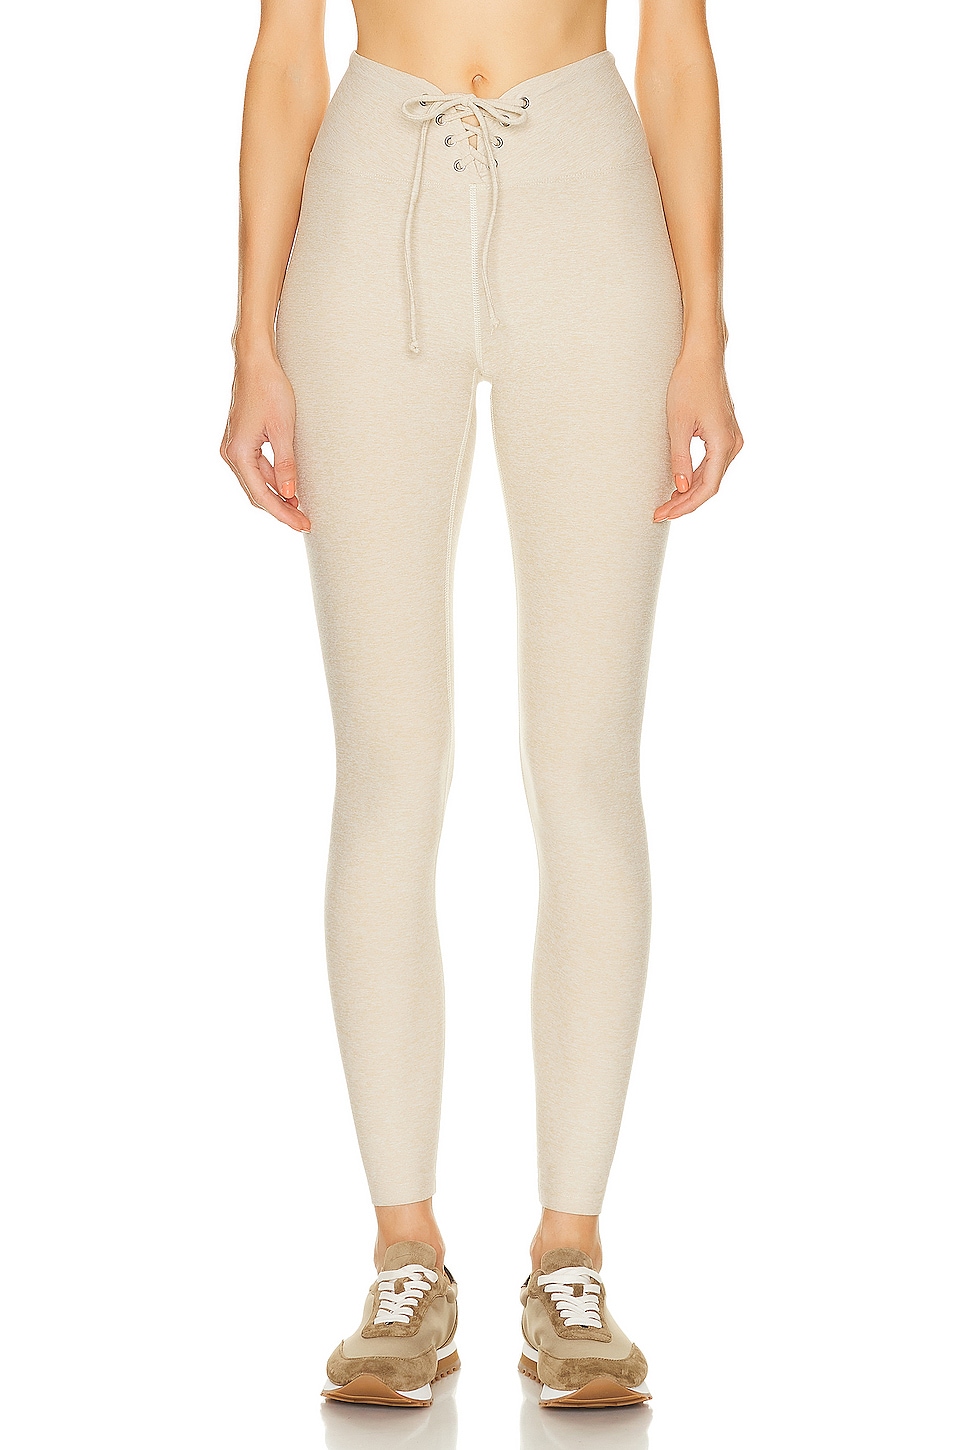 Image 1 of YEAR OF OURS Stretch Football Legging in Honey Butter